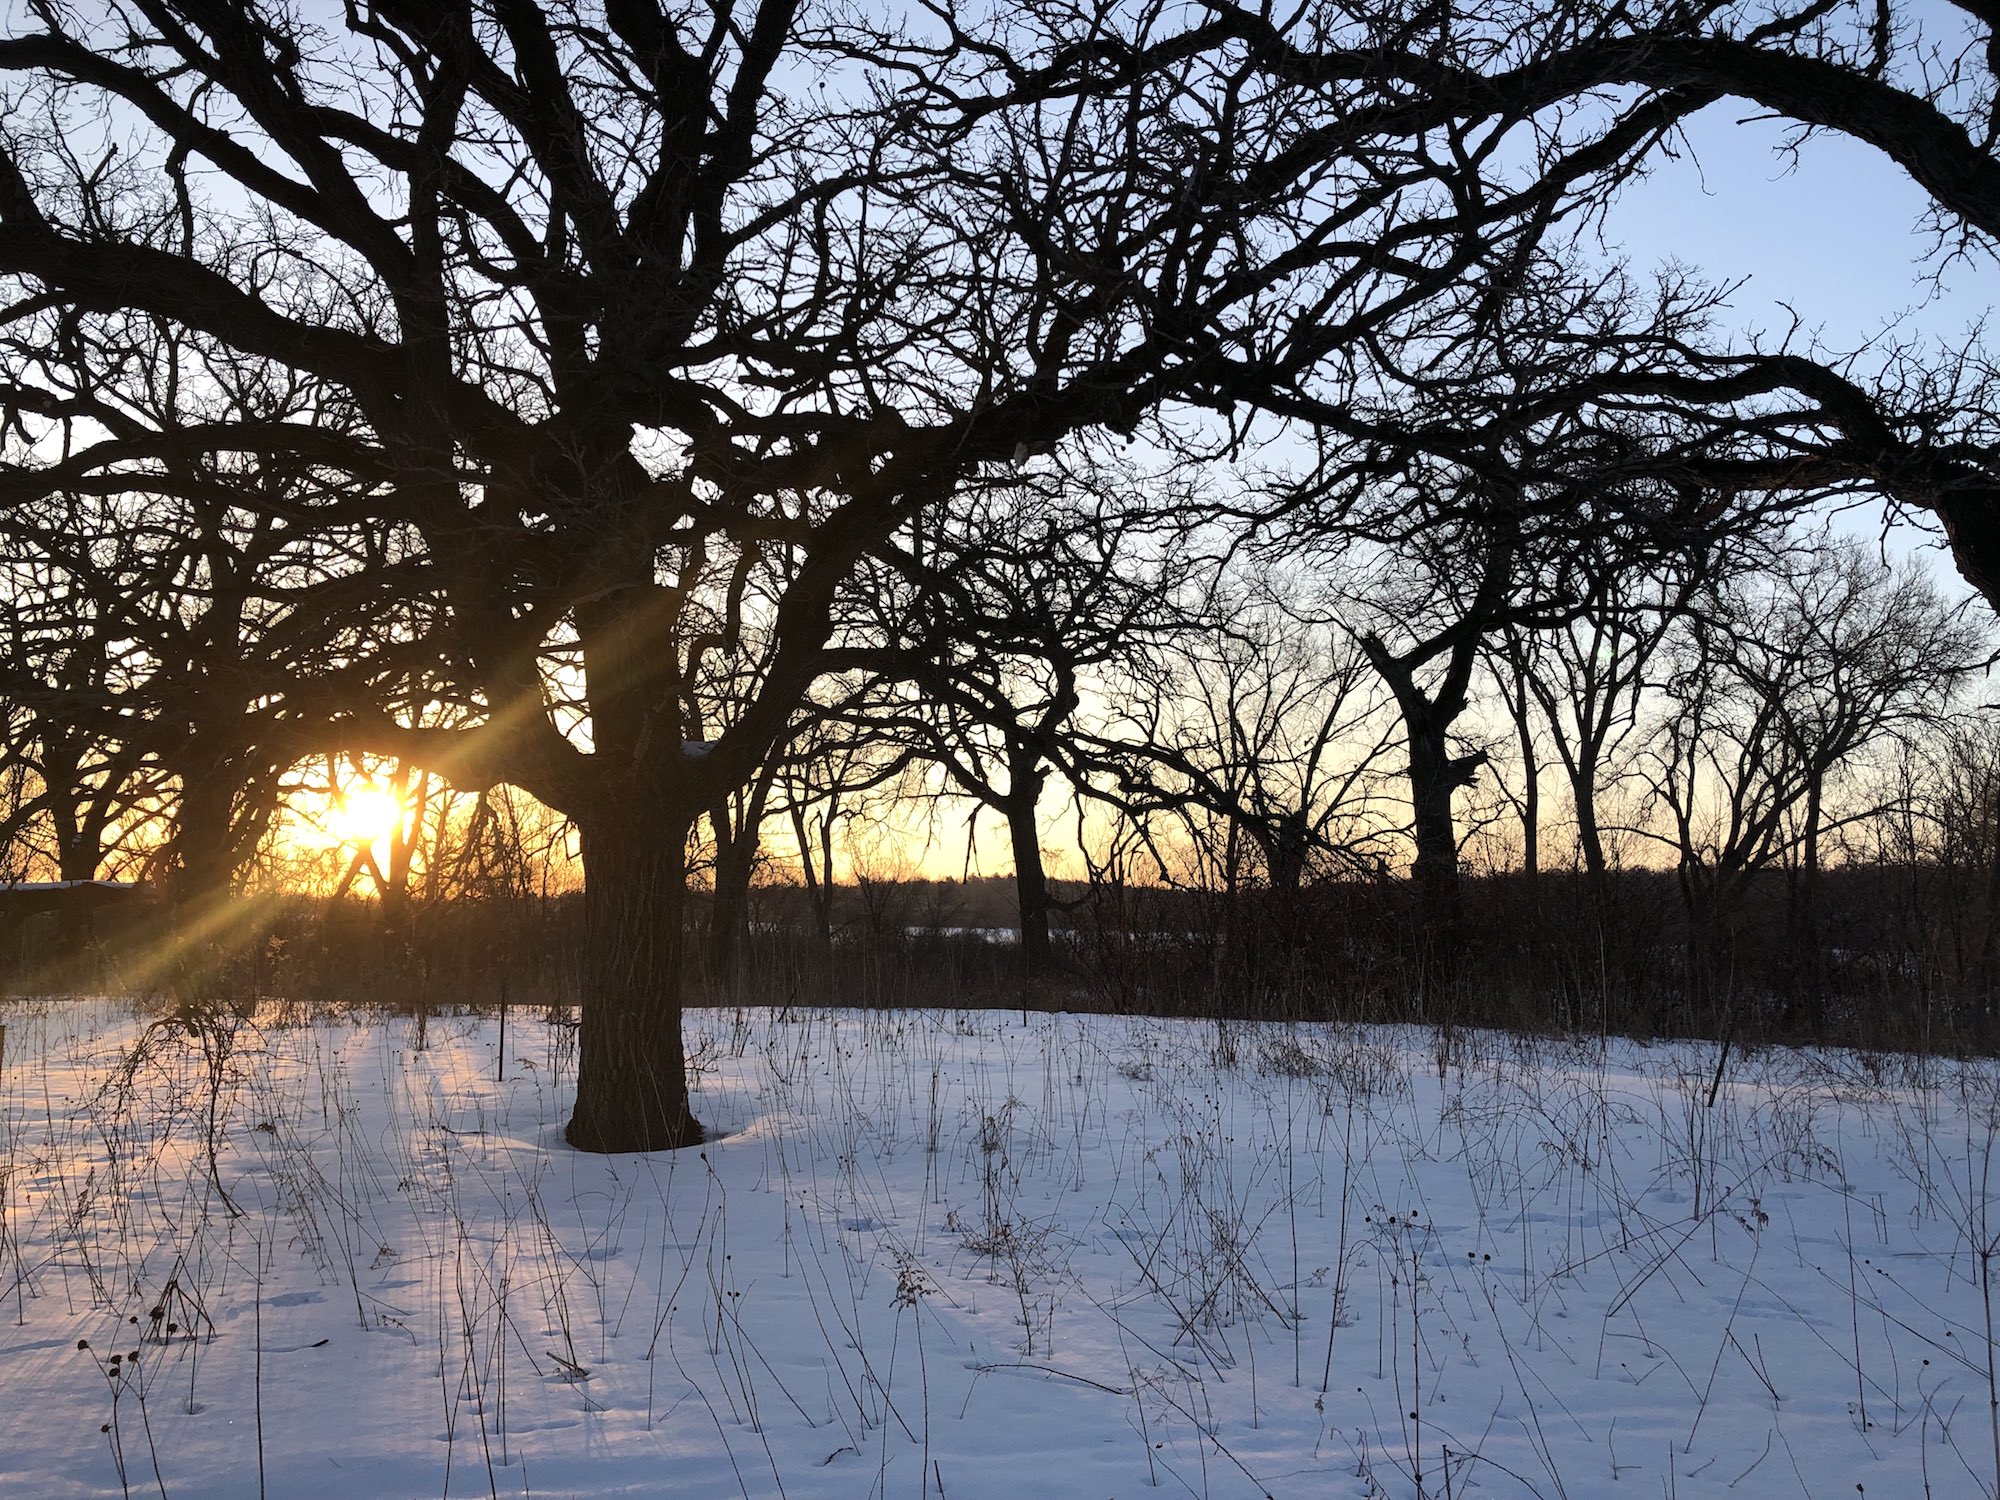 Oak Savanna on March 5, 2019 in University of Wisconsin Arboretum in Madison, Wisconsin on the north shore of Lake Wingra.